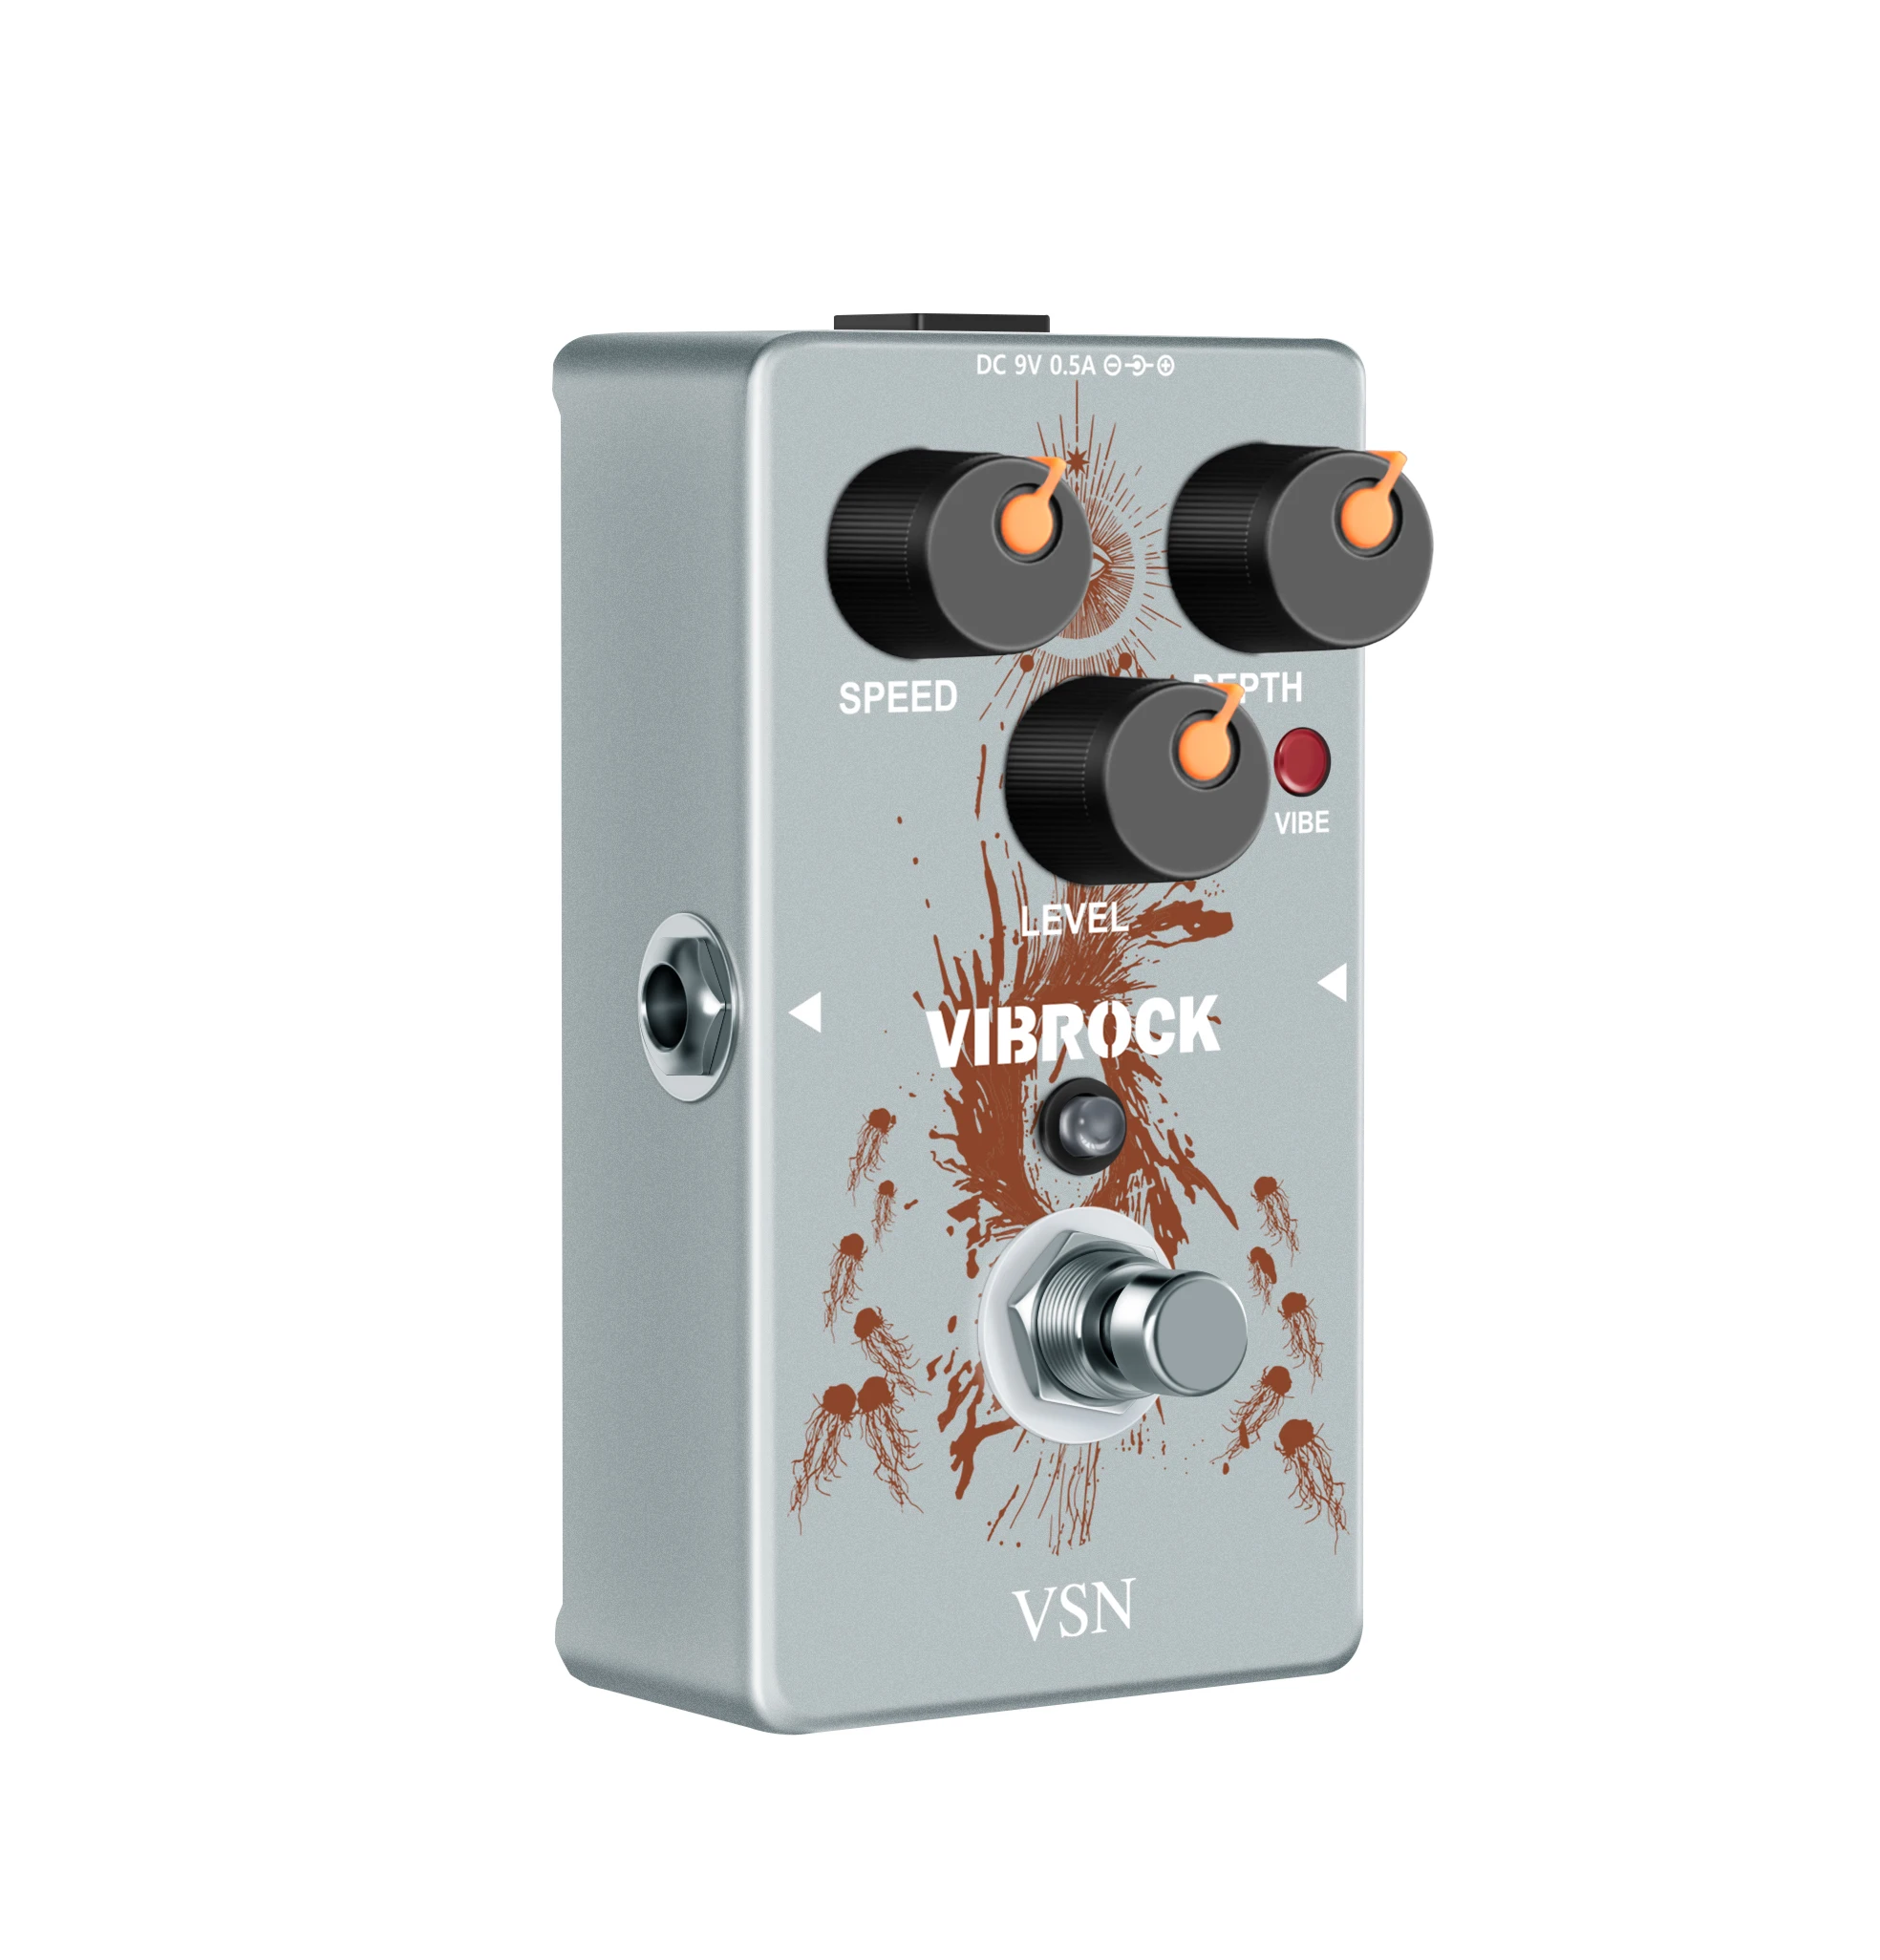 VSN Vibrock Chorus&Tremolo Guitar Multi-Effect Pedal True Bypass Working On Both DC 9V Adaper &  Battery For Outdoor Play enlarge